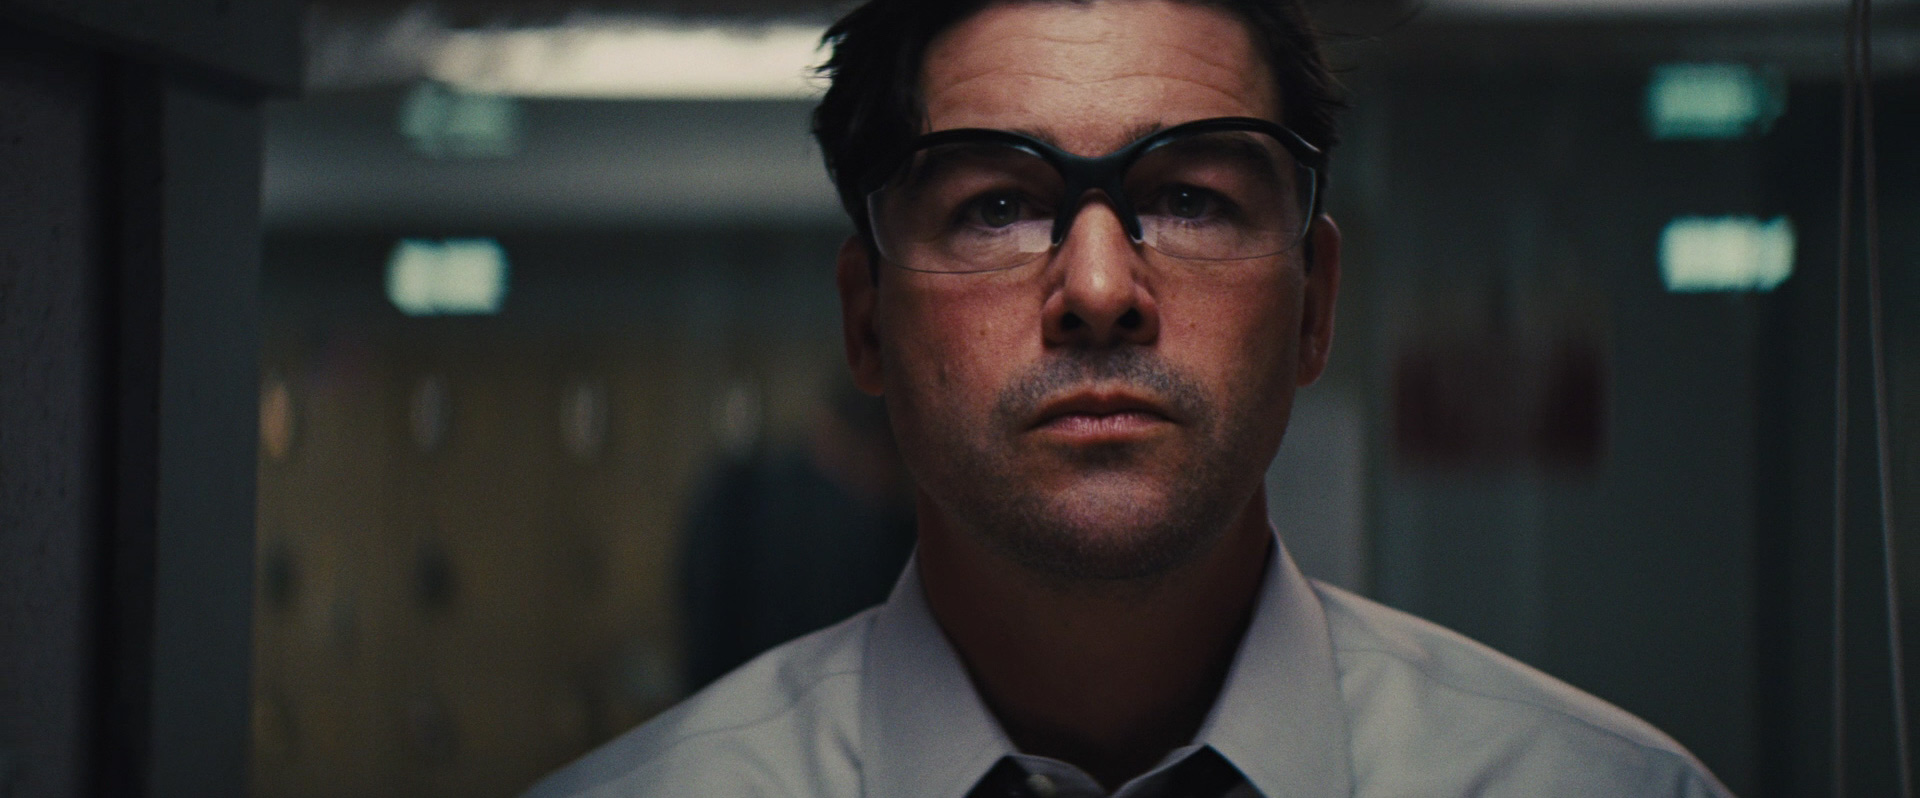 Kyle Chandler in The Wolf of Wall Street